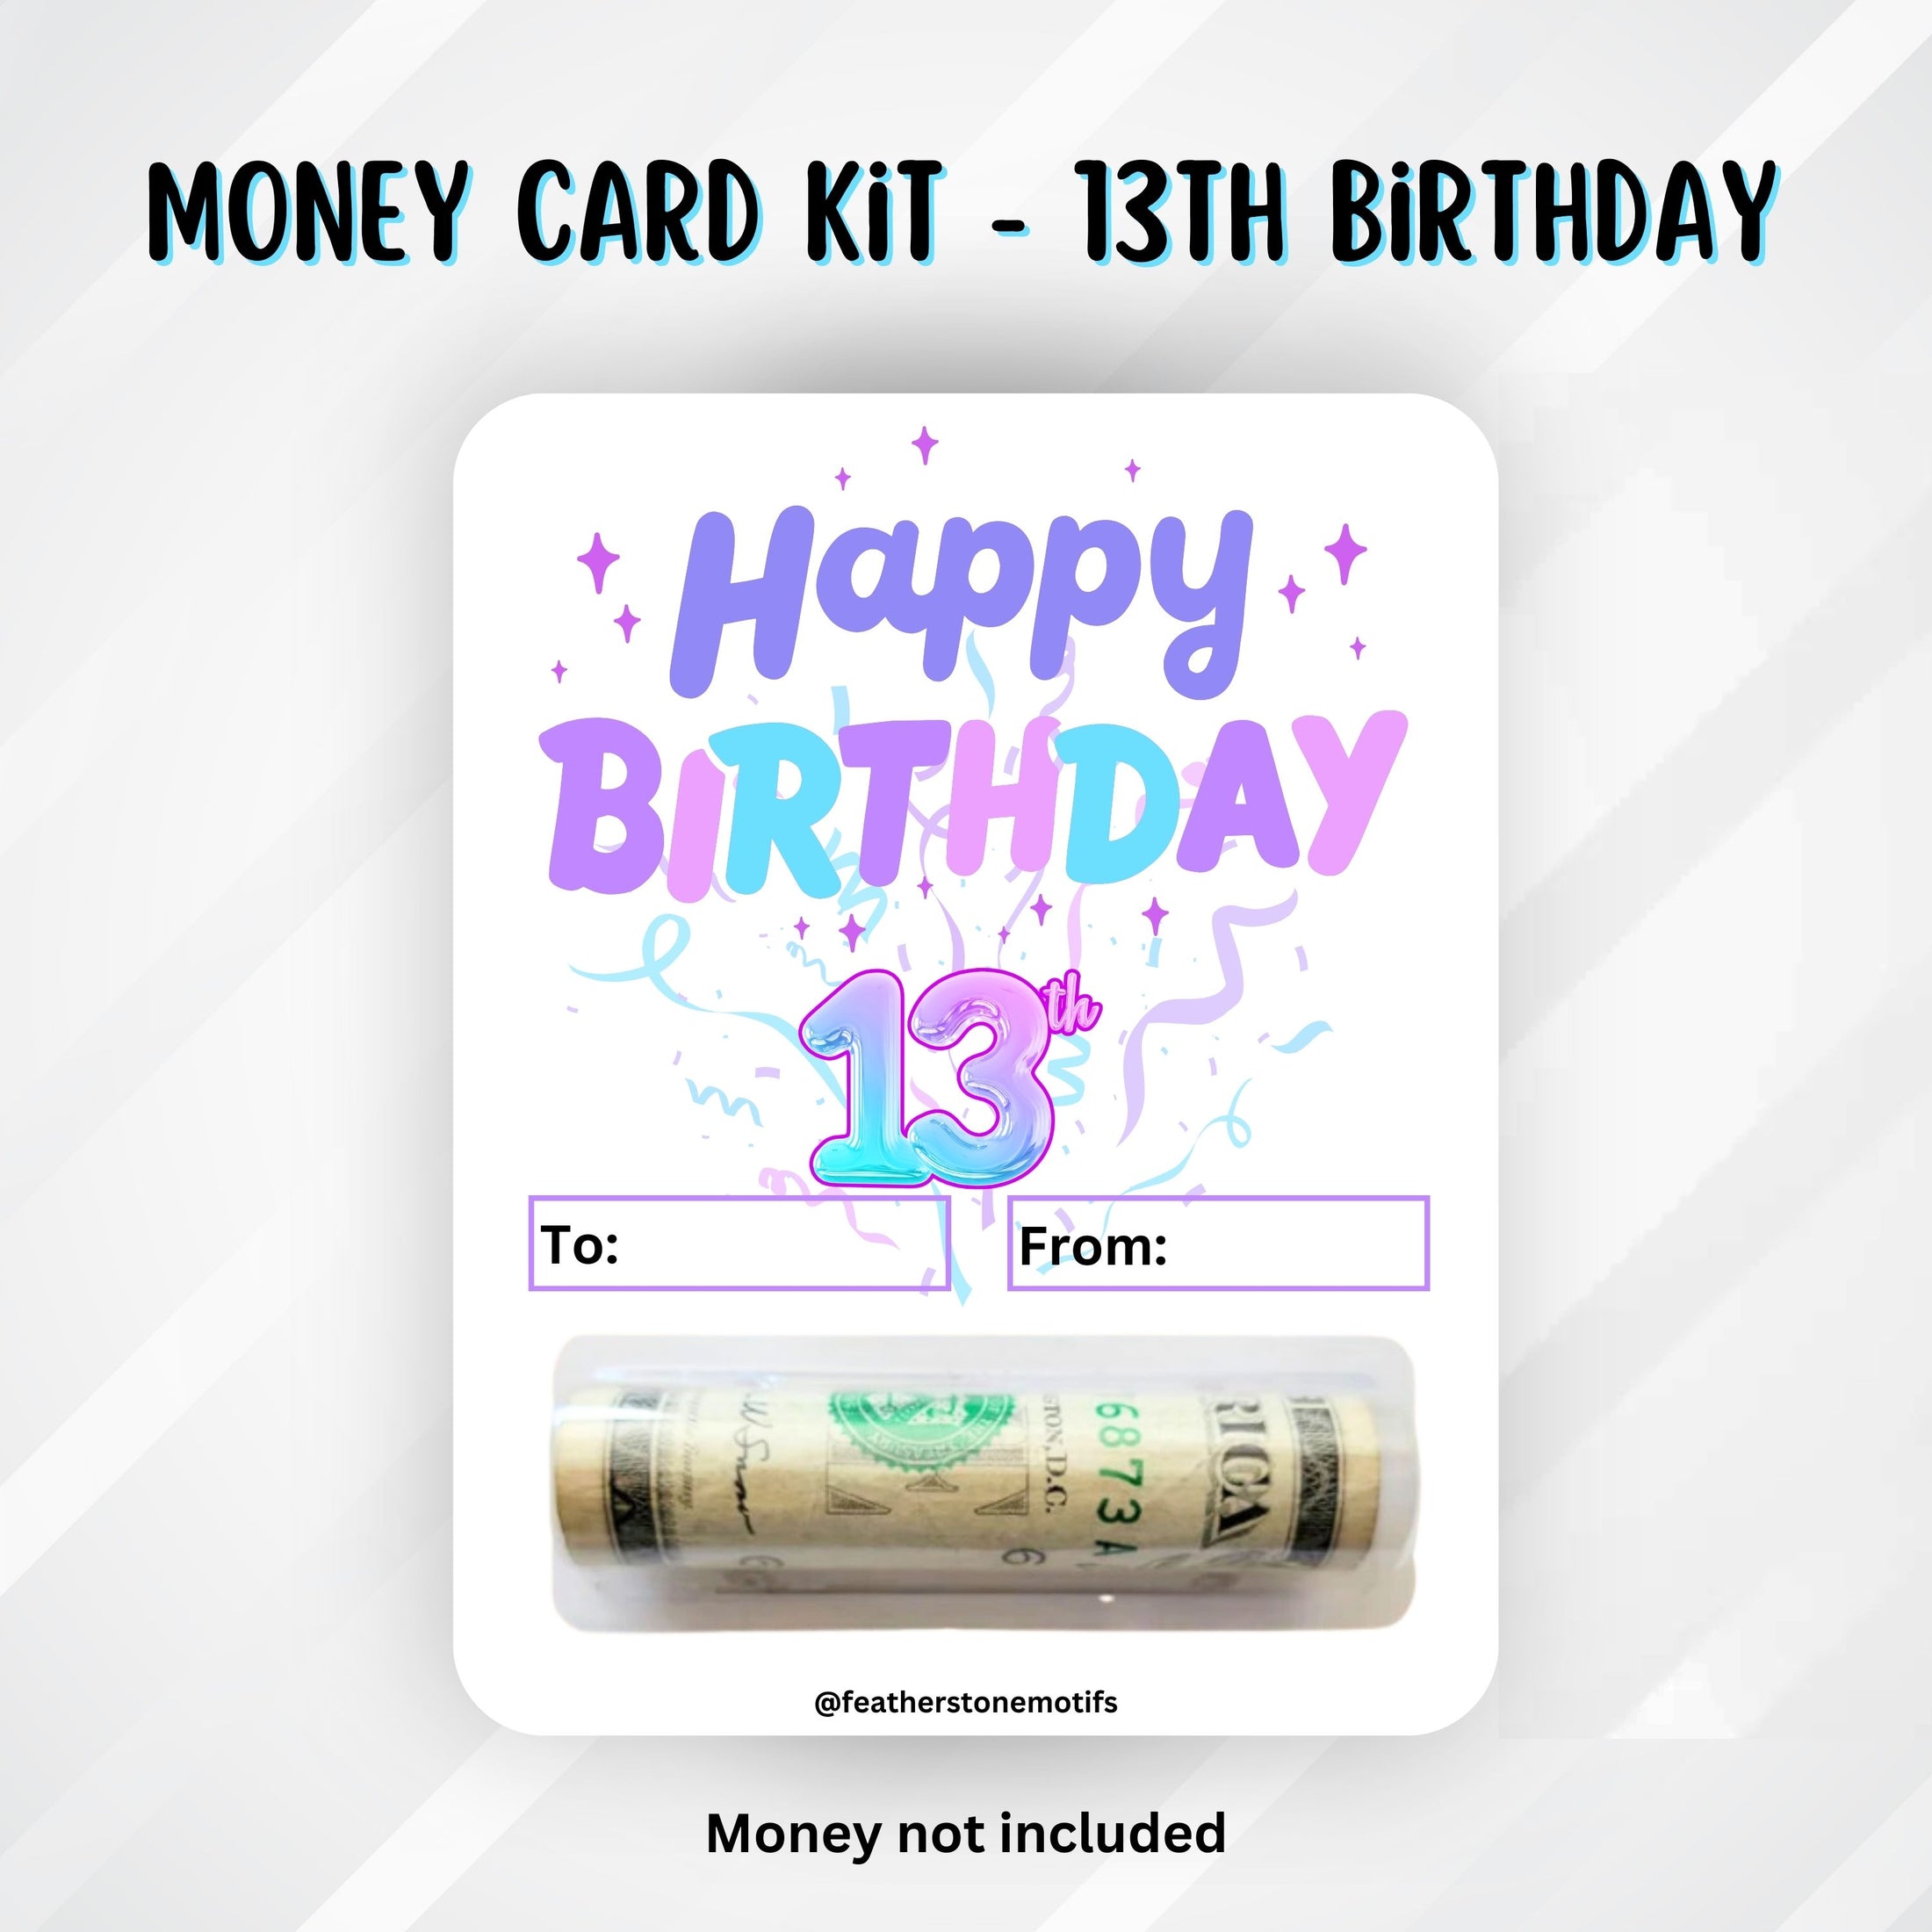 This image shows the money tube attached to the 13th Birthday money card.